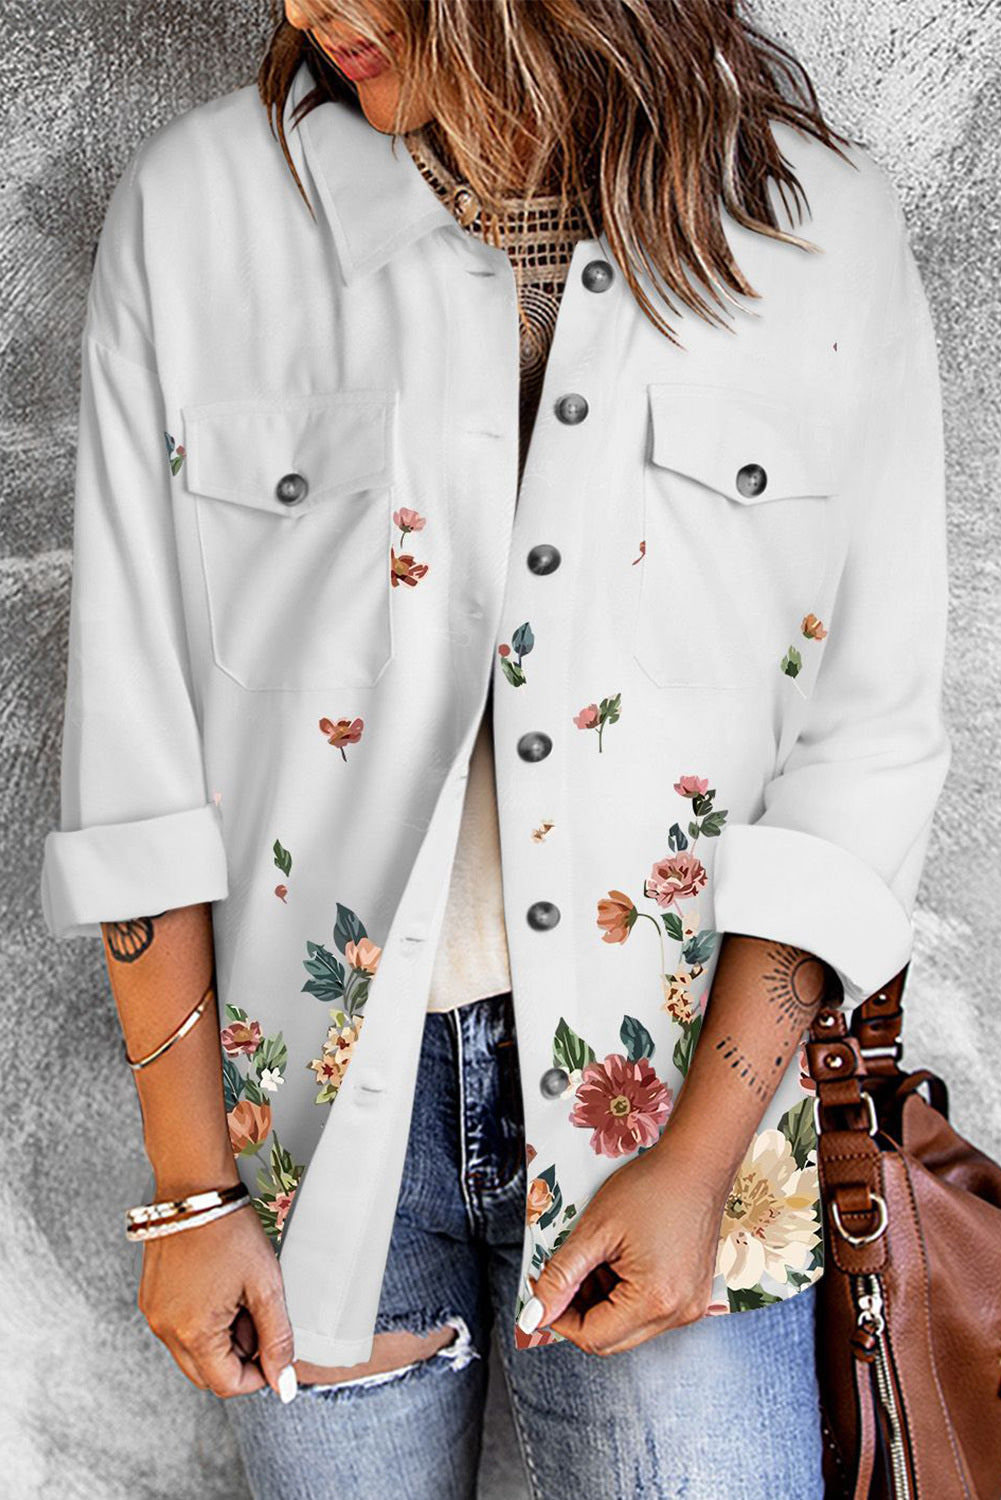 White Floral Casual Shirts For Women